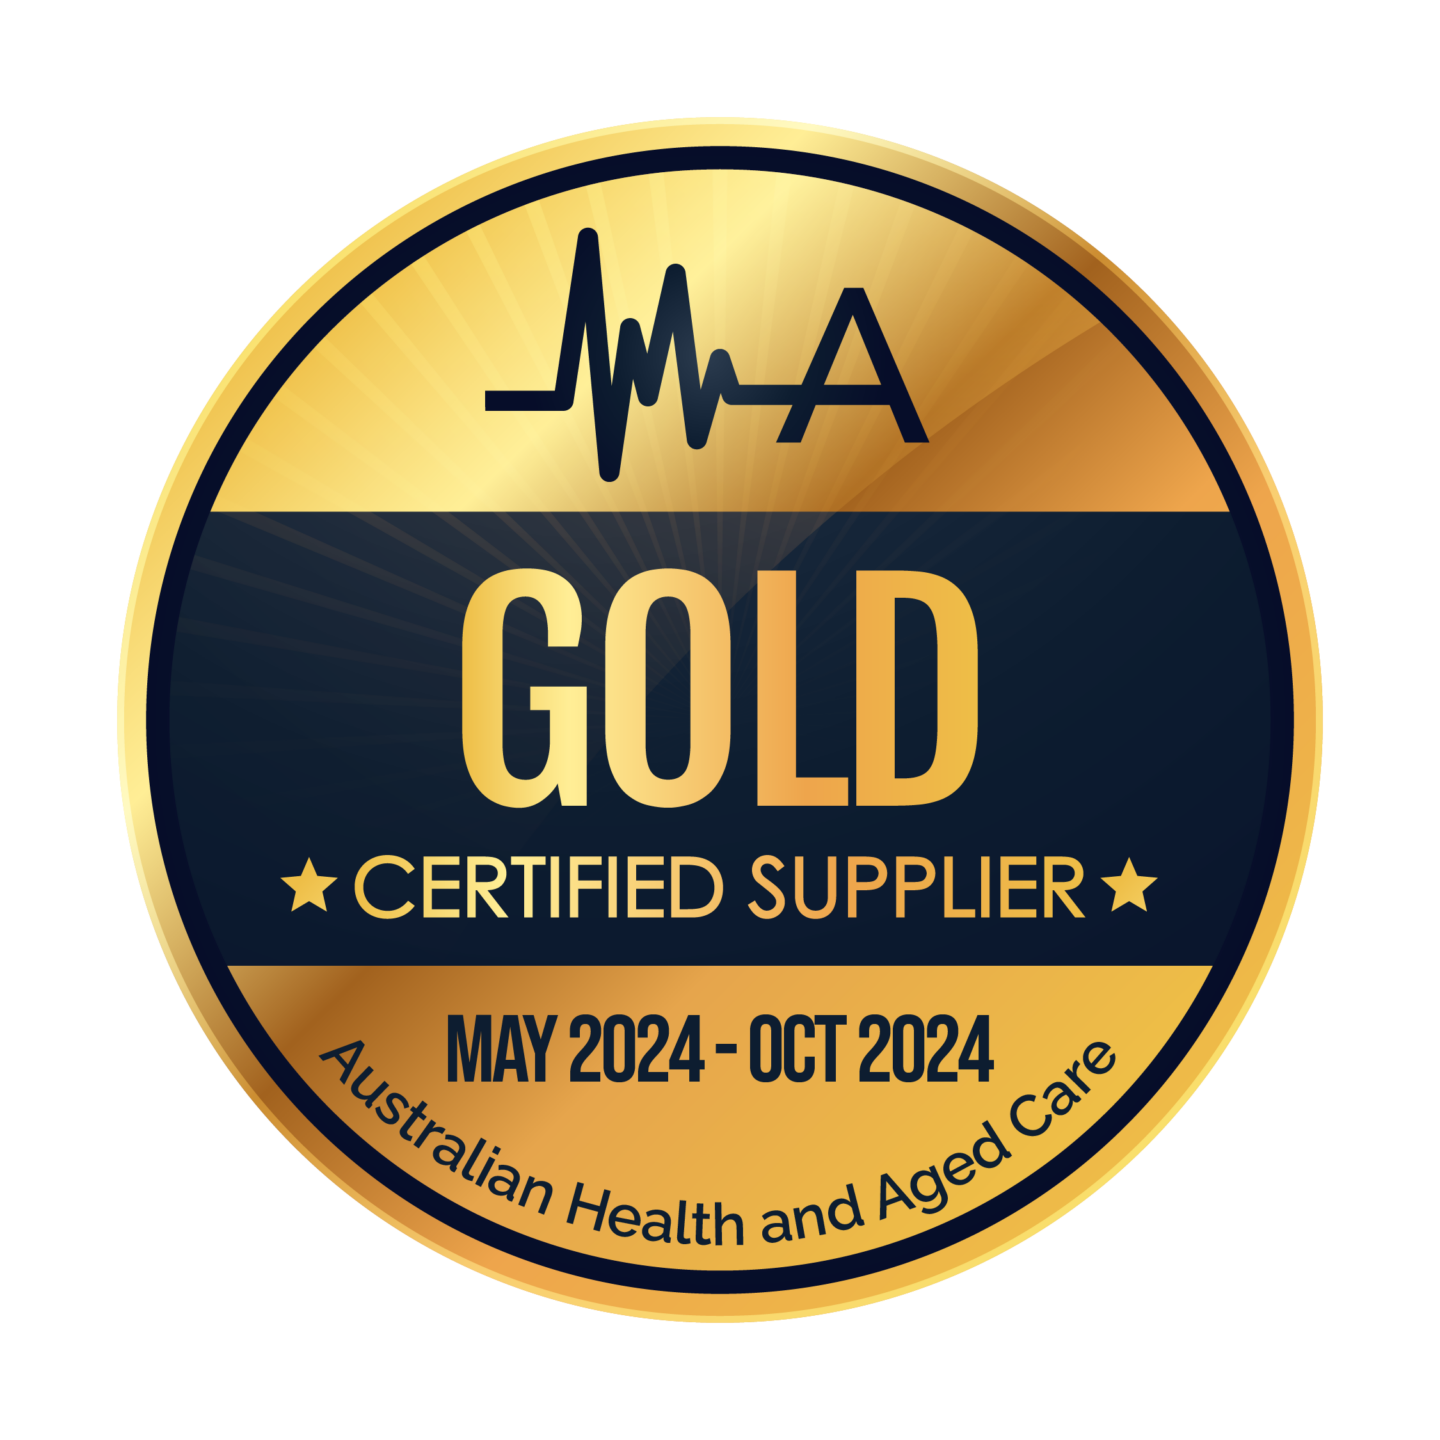 TIMG - Certified Gold Supplier to Australian Health and Aged Care